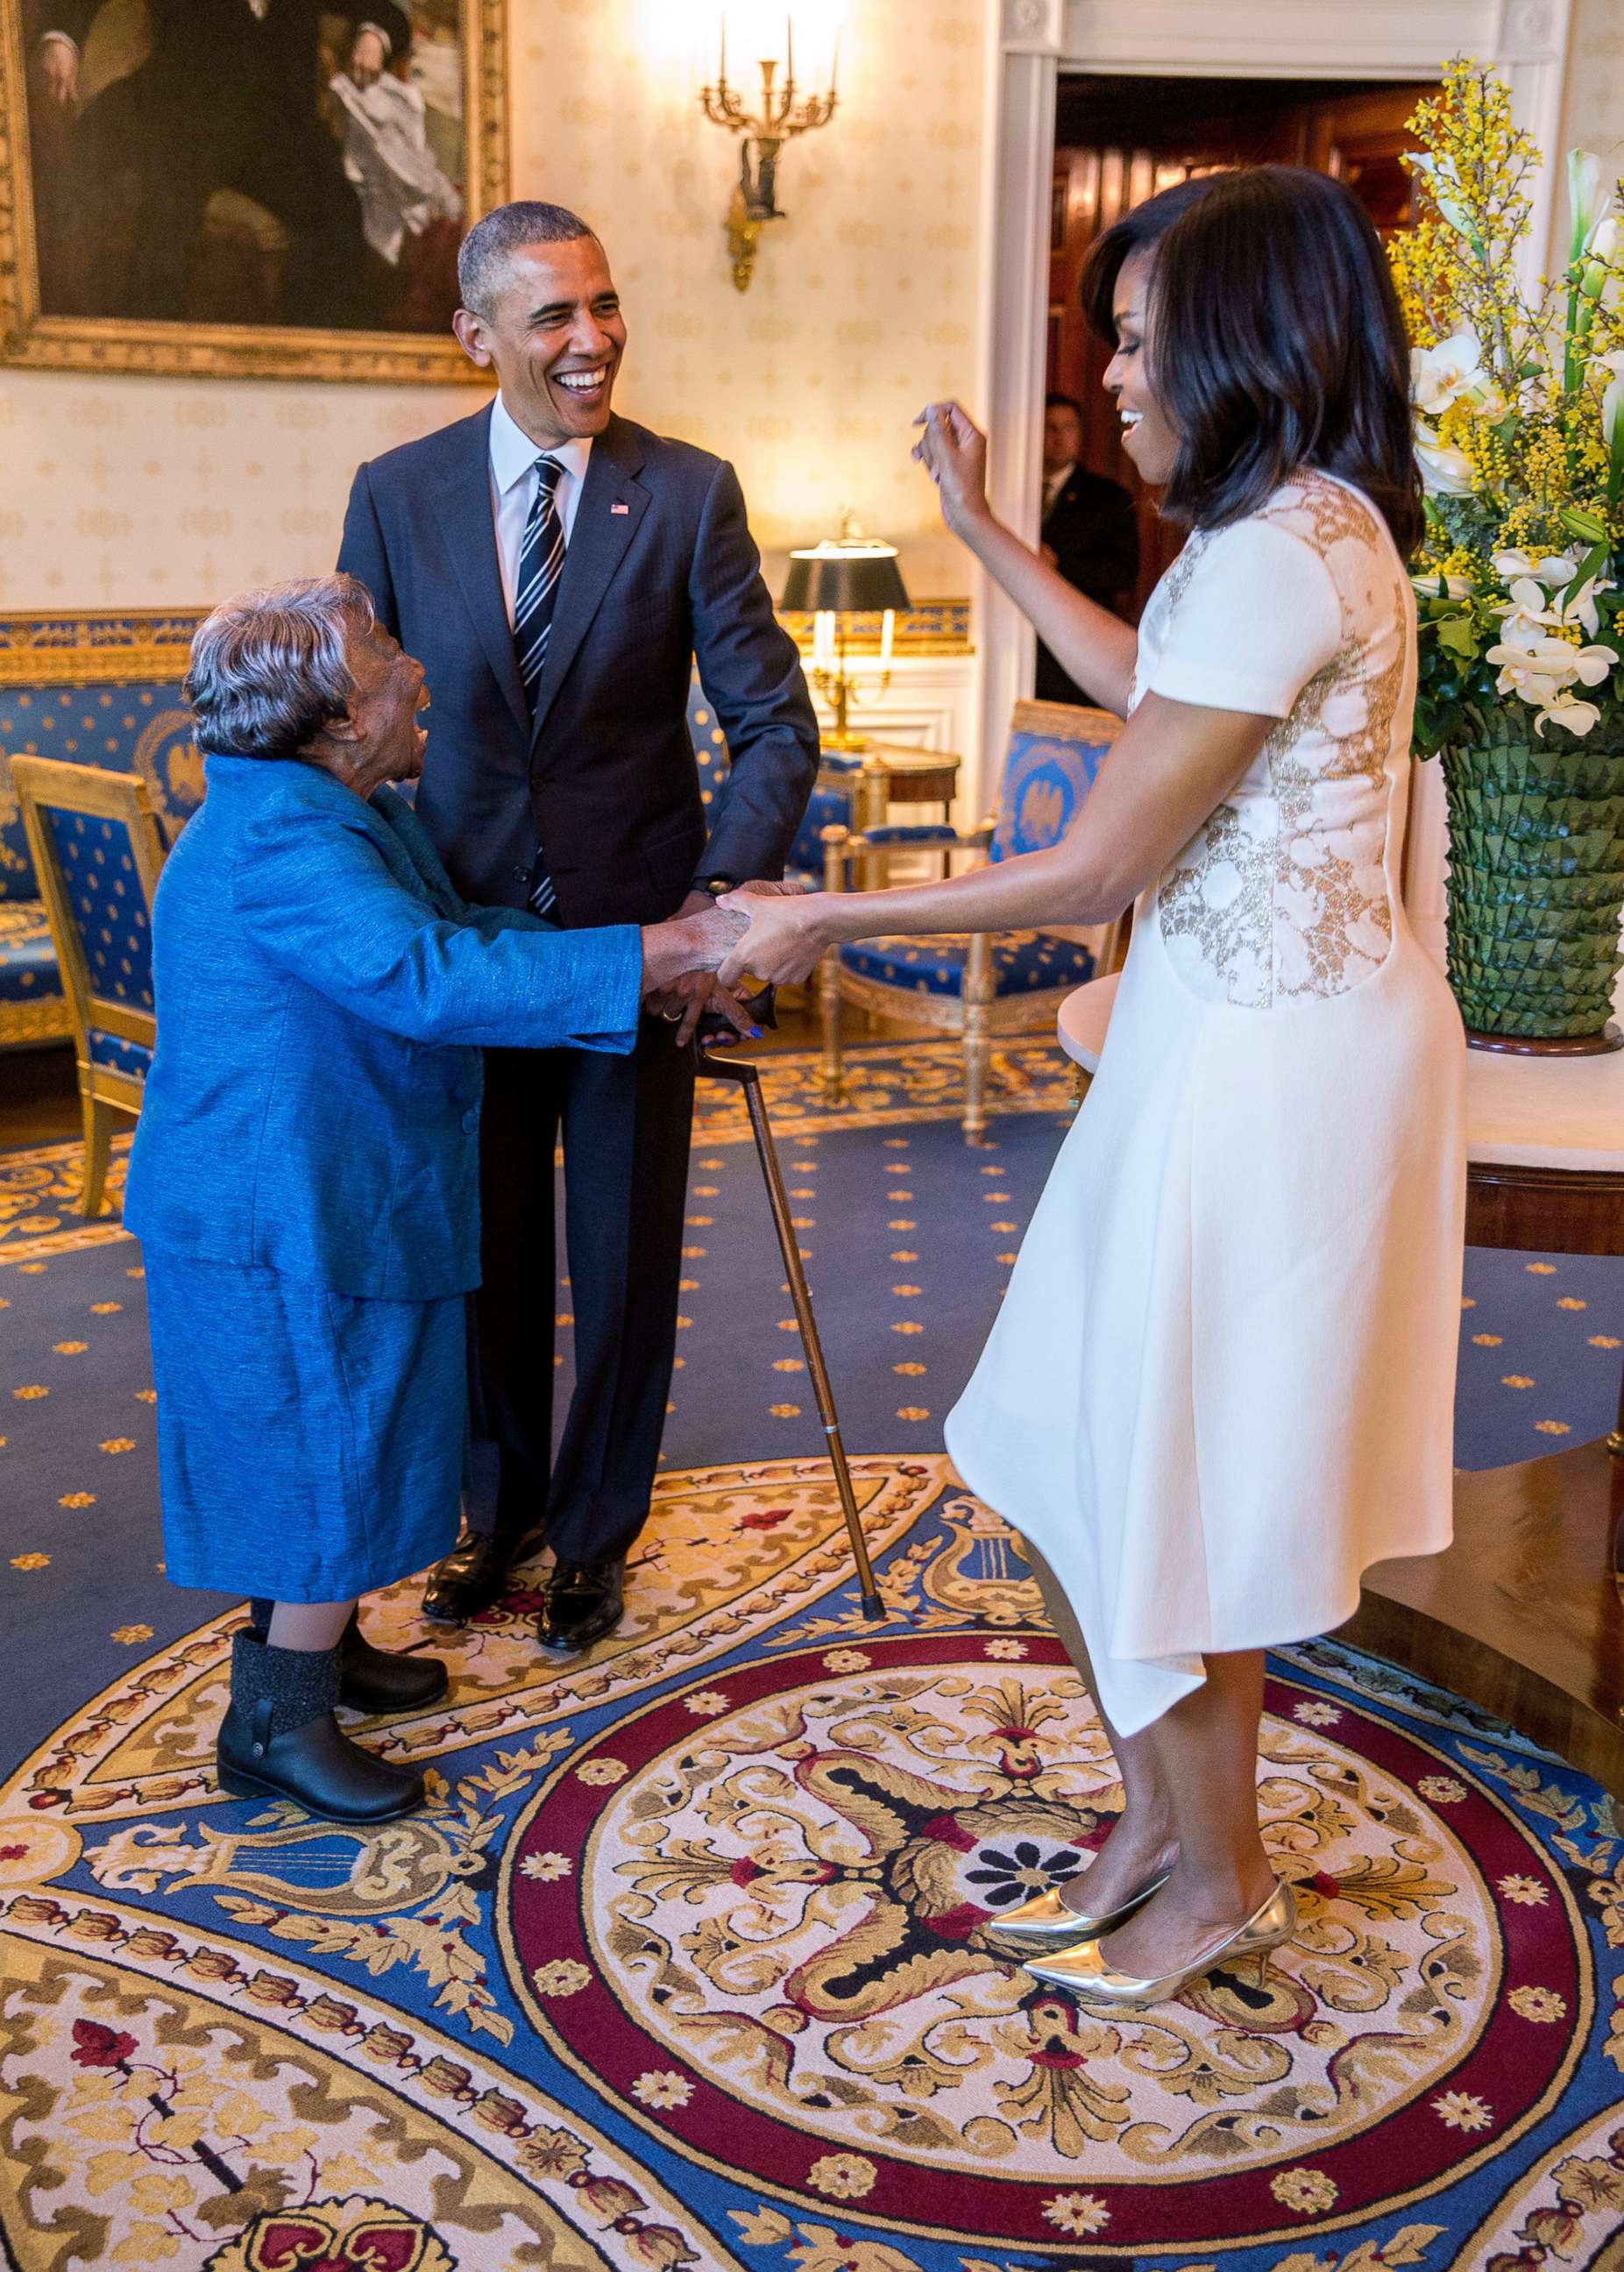 PHOTO: President Barack Obama watches First Lady Michelle Obama dance with Virginia McLaurin in the Blue Room of the White House prior to a reception celebrating African American History Month, Feb. 18, 2016.